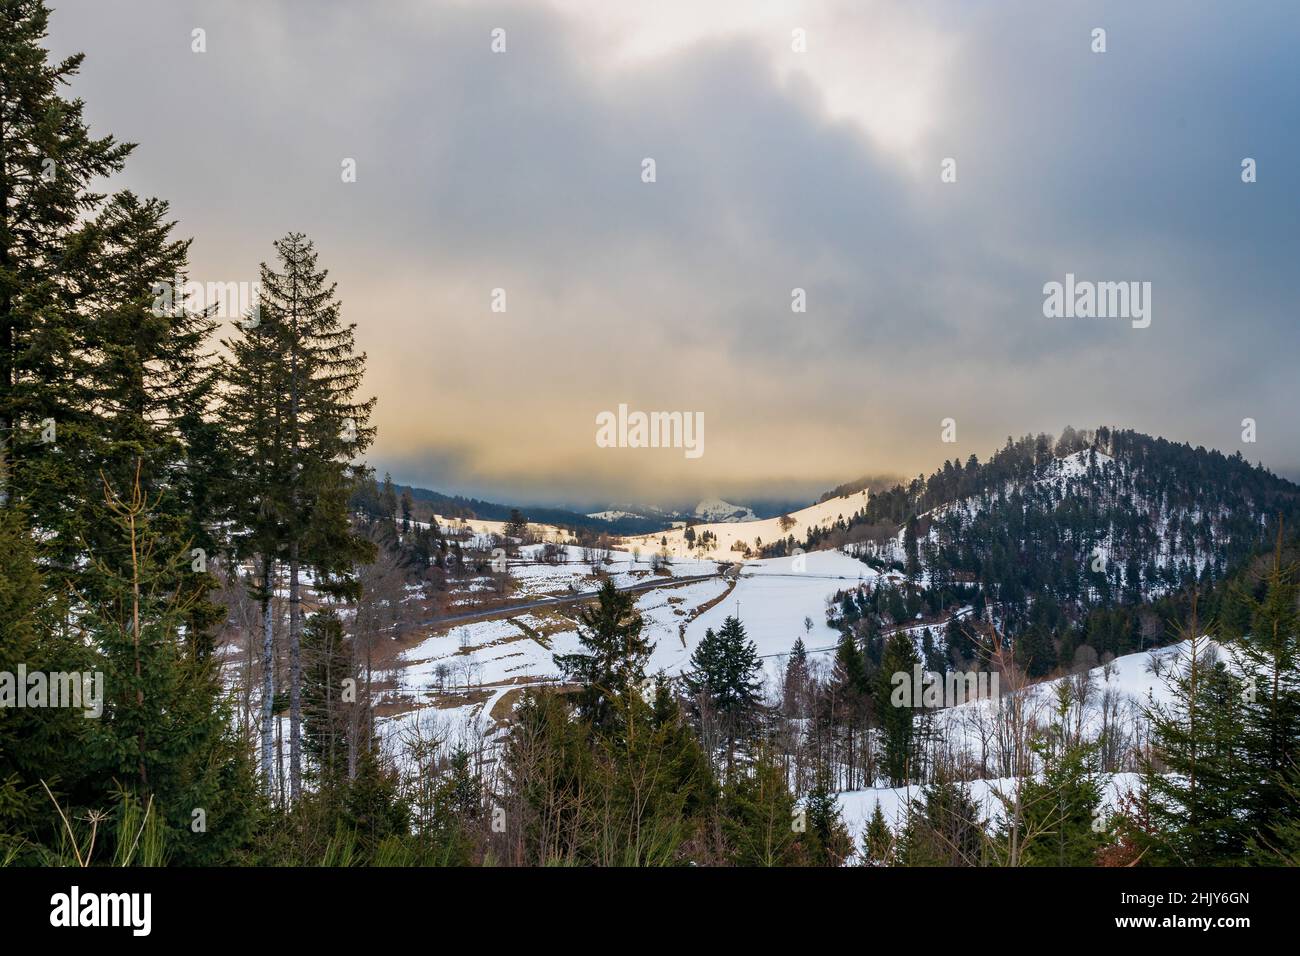 Germany, Black Forest - view over kleines Wiesental from Nonnenmattweiher car park, by evening atmosphere Stock Photo